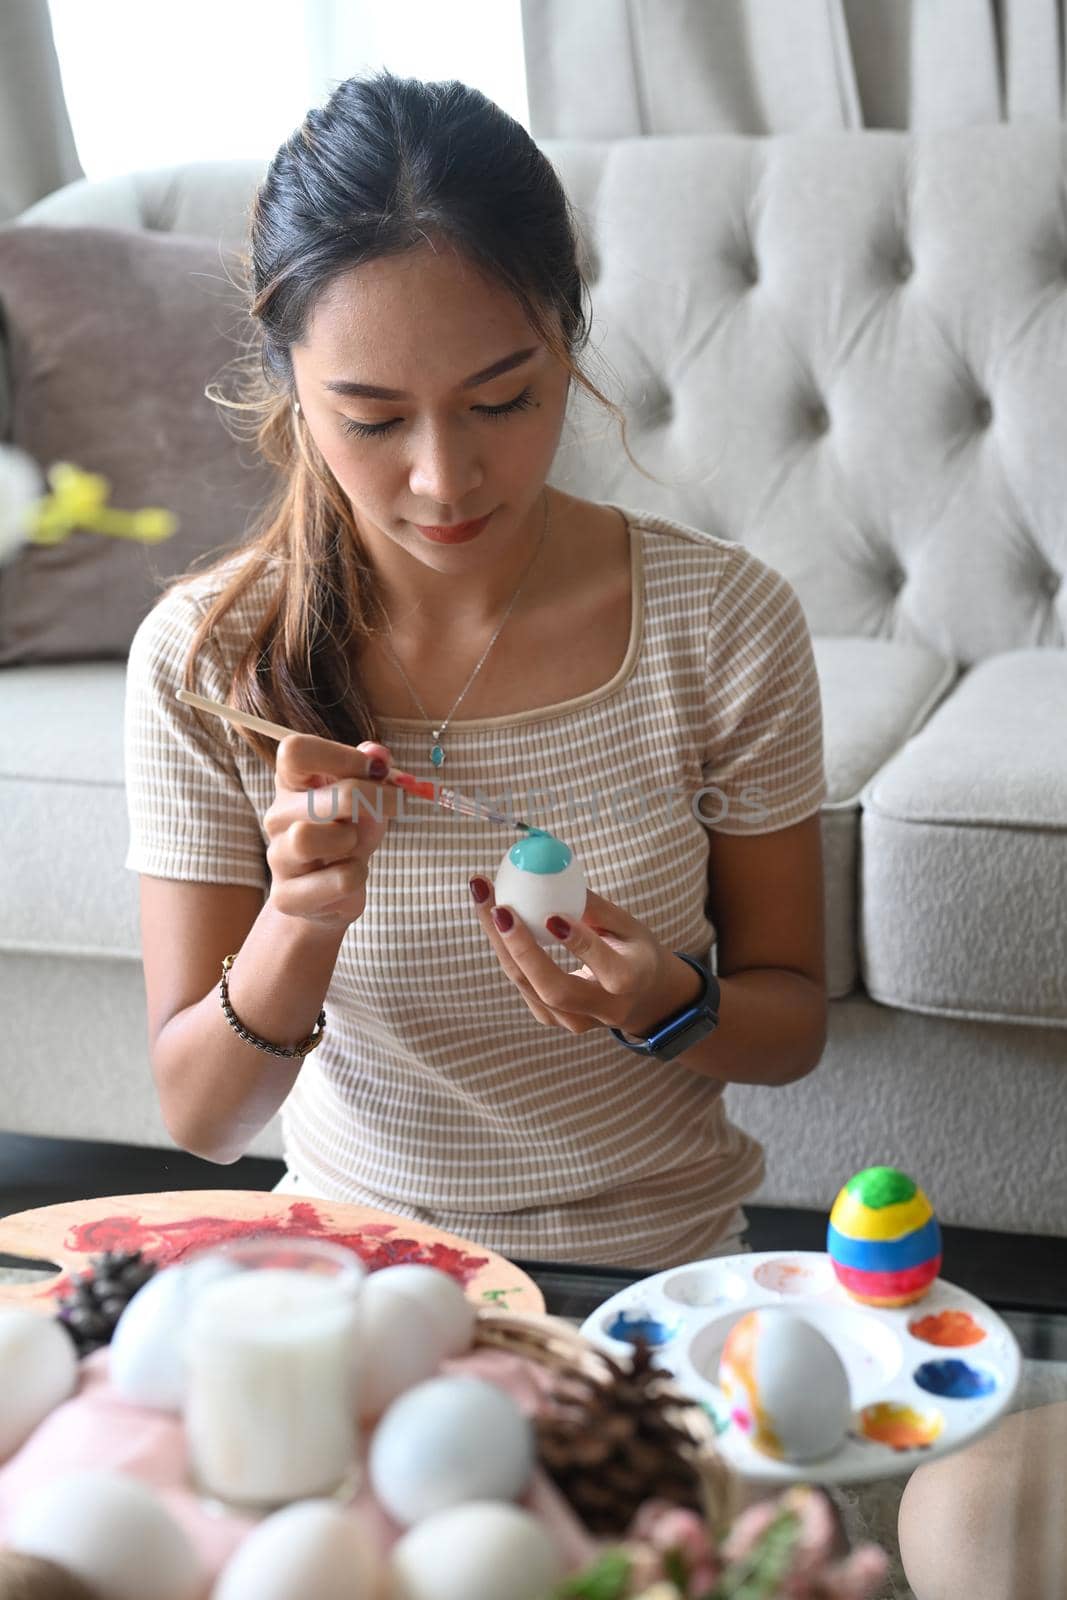 Attractive young woman sitting in living room and painting egg for Easter festivity.